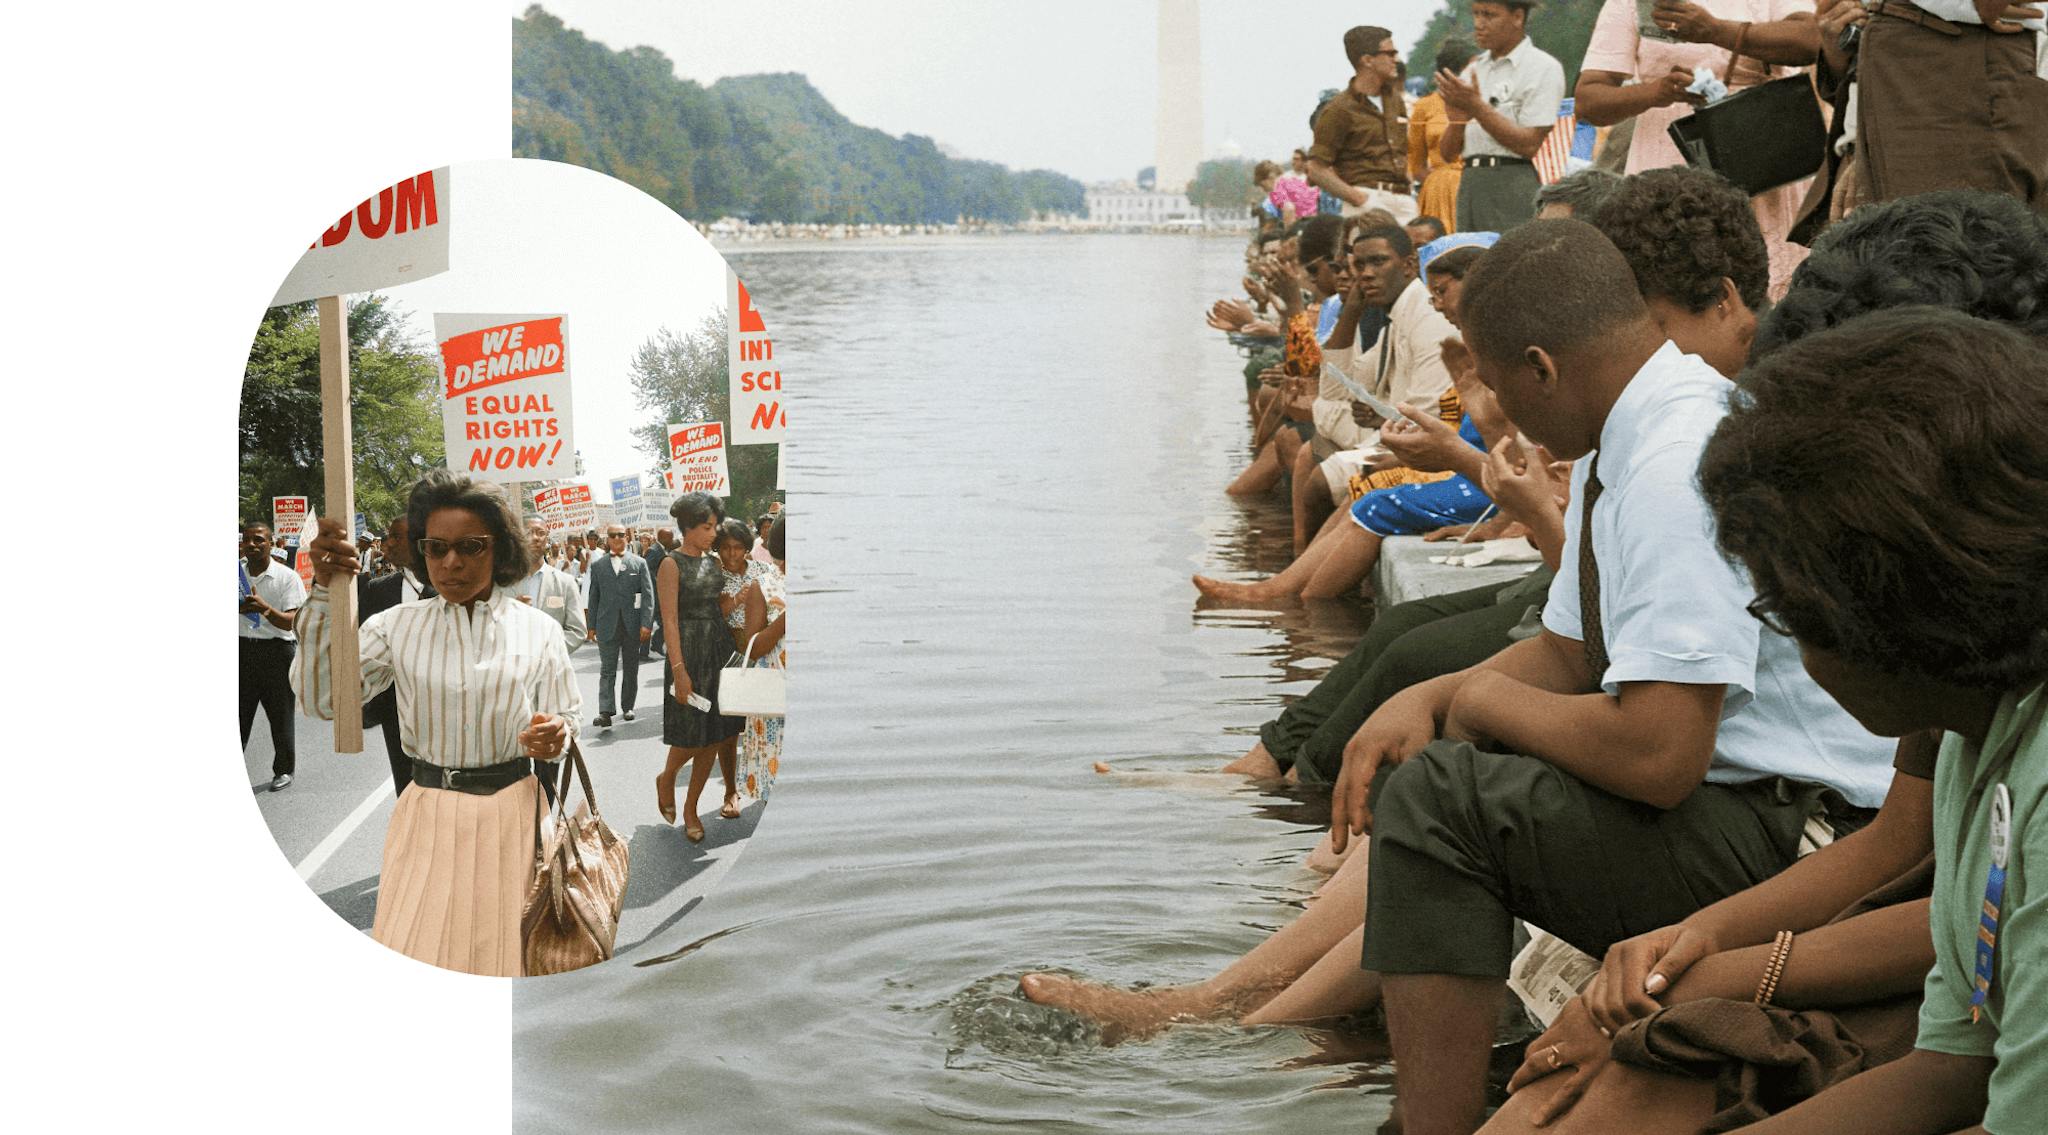 Demonstrators protesting the right to vote and equal civil rights at the March on Washington in 1963